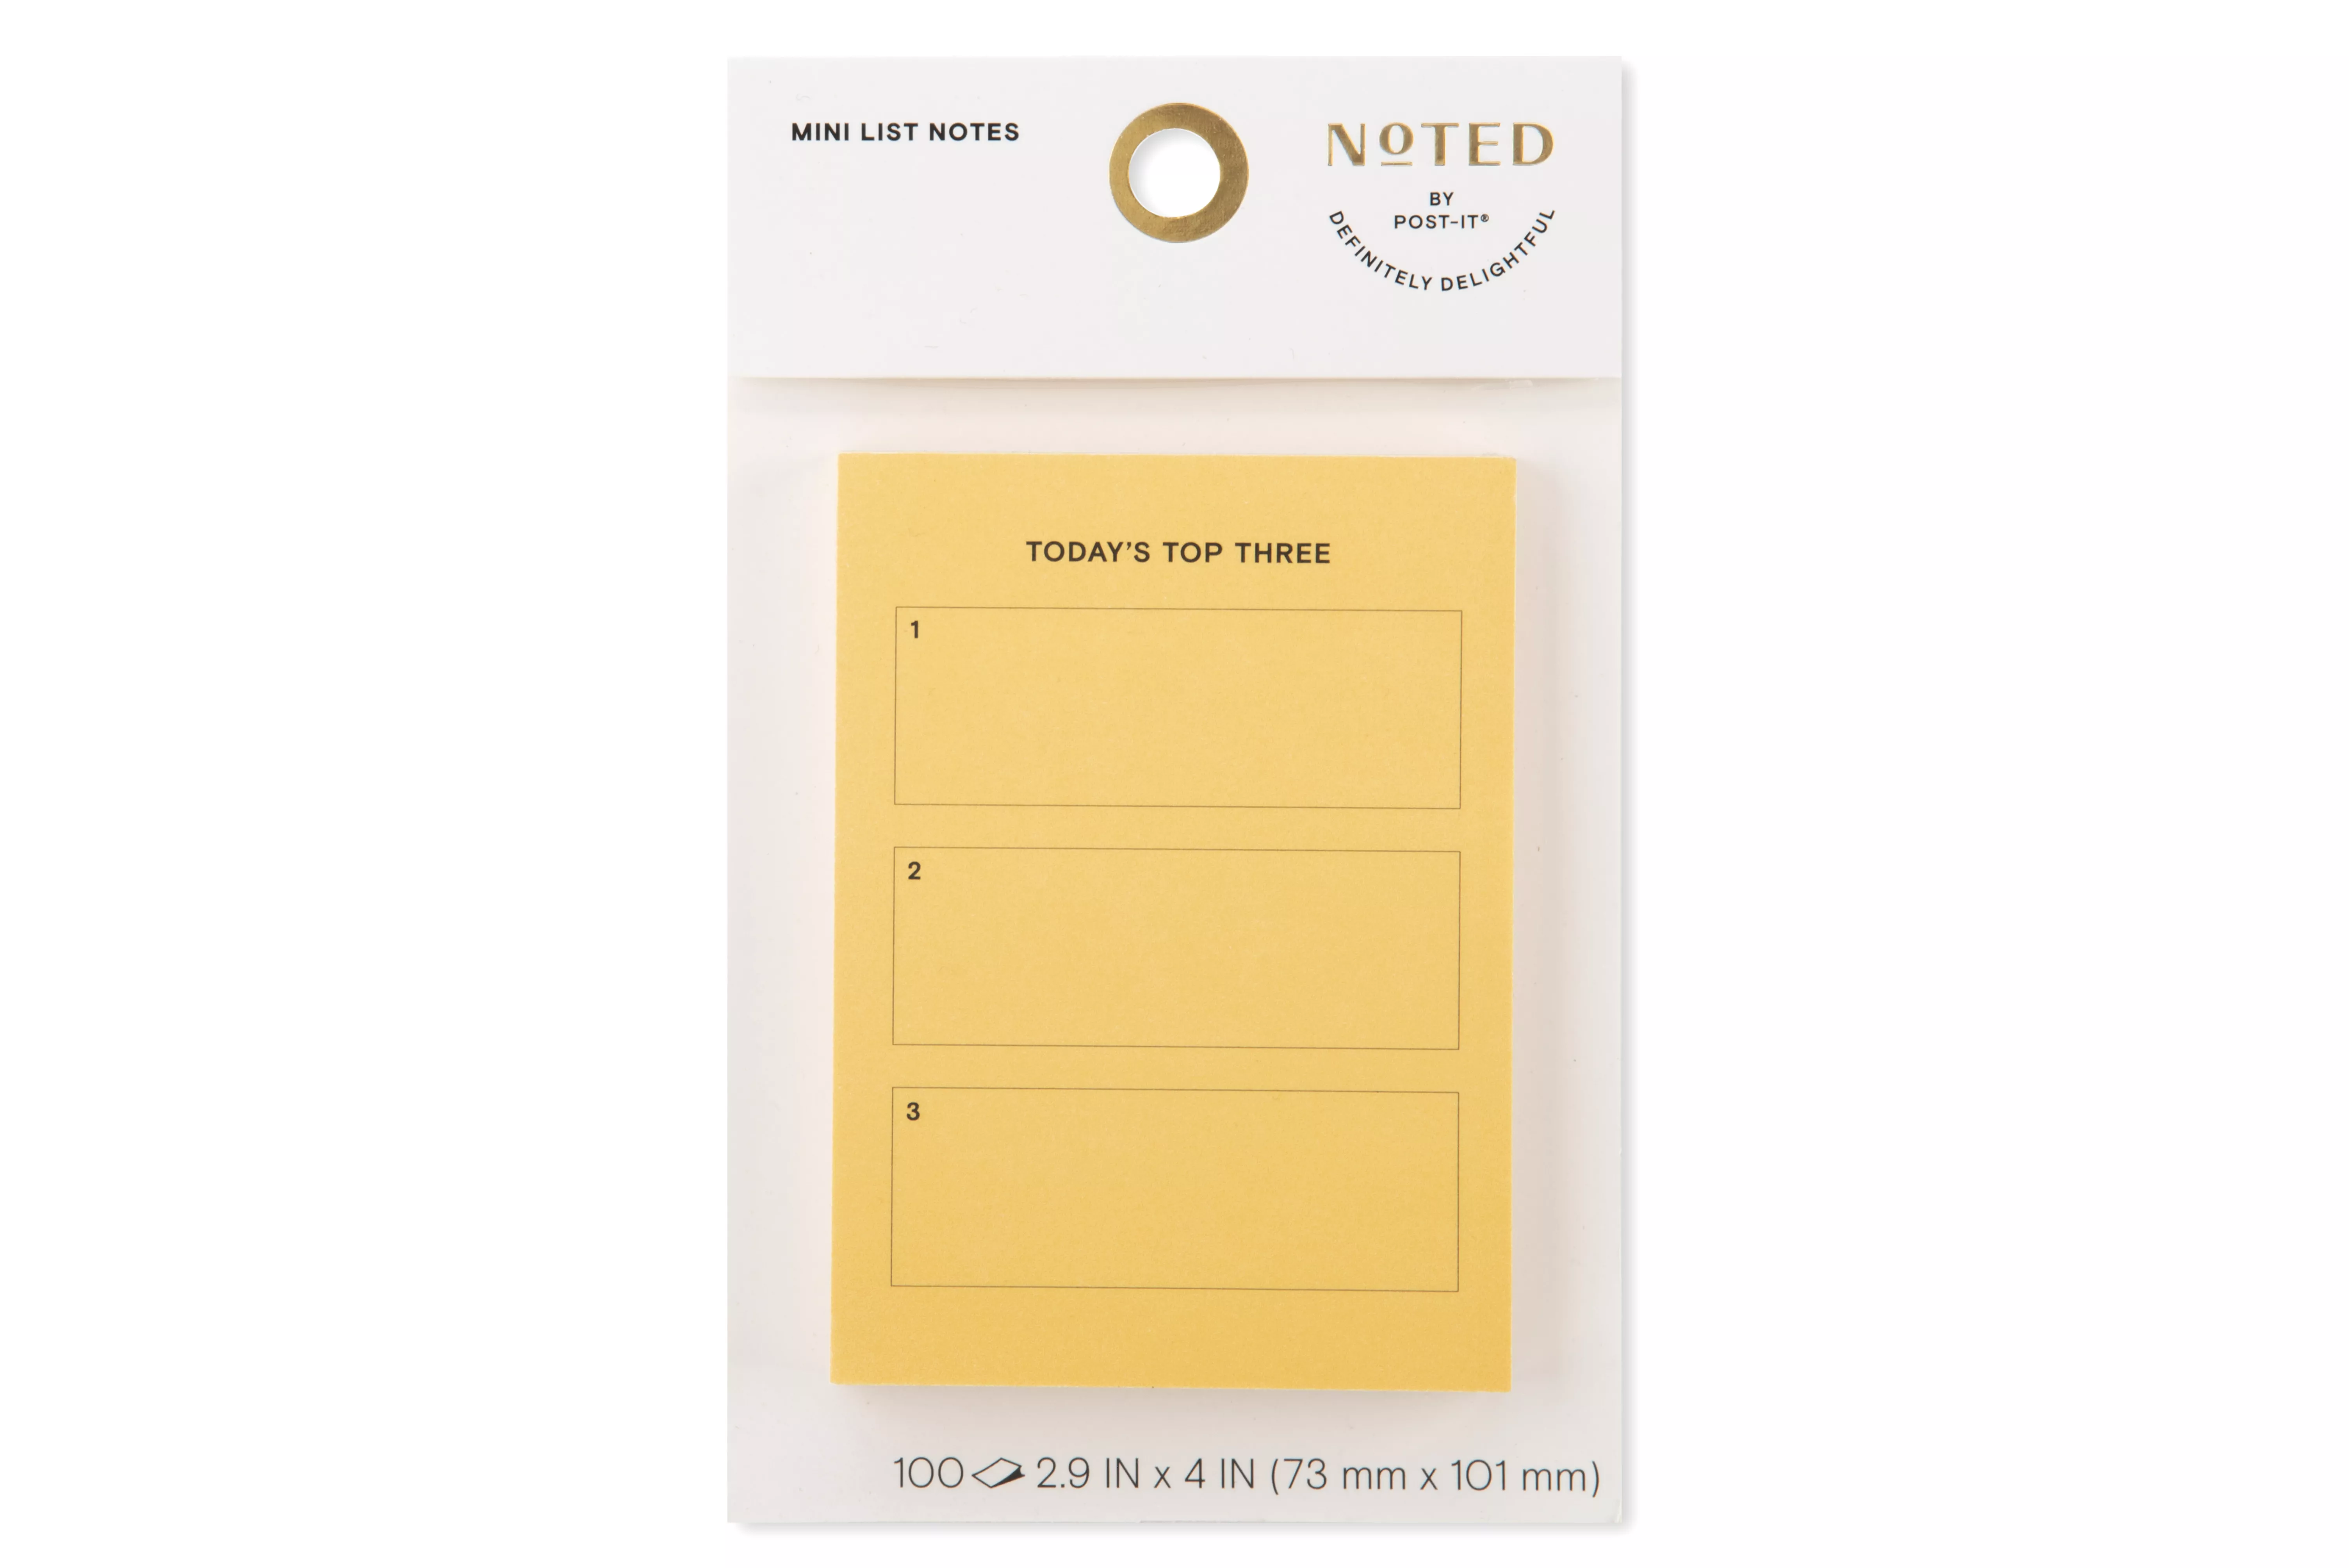 Post-it® Printed Notes NTD-34-OR, 4 in x 2.9 in (101 mm x 73 mm)